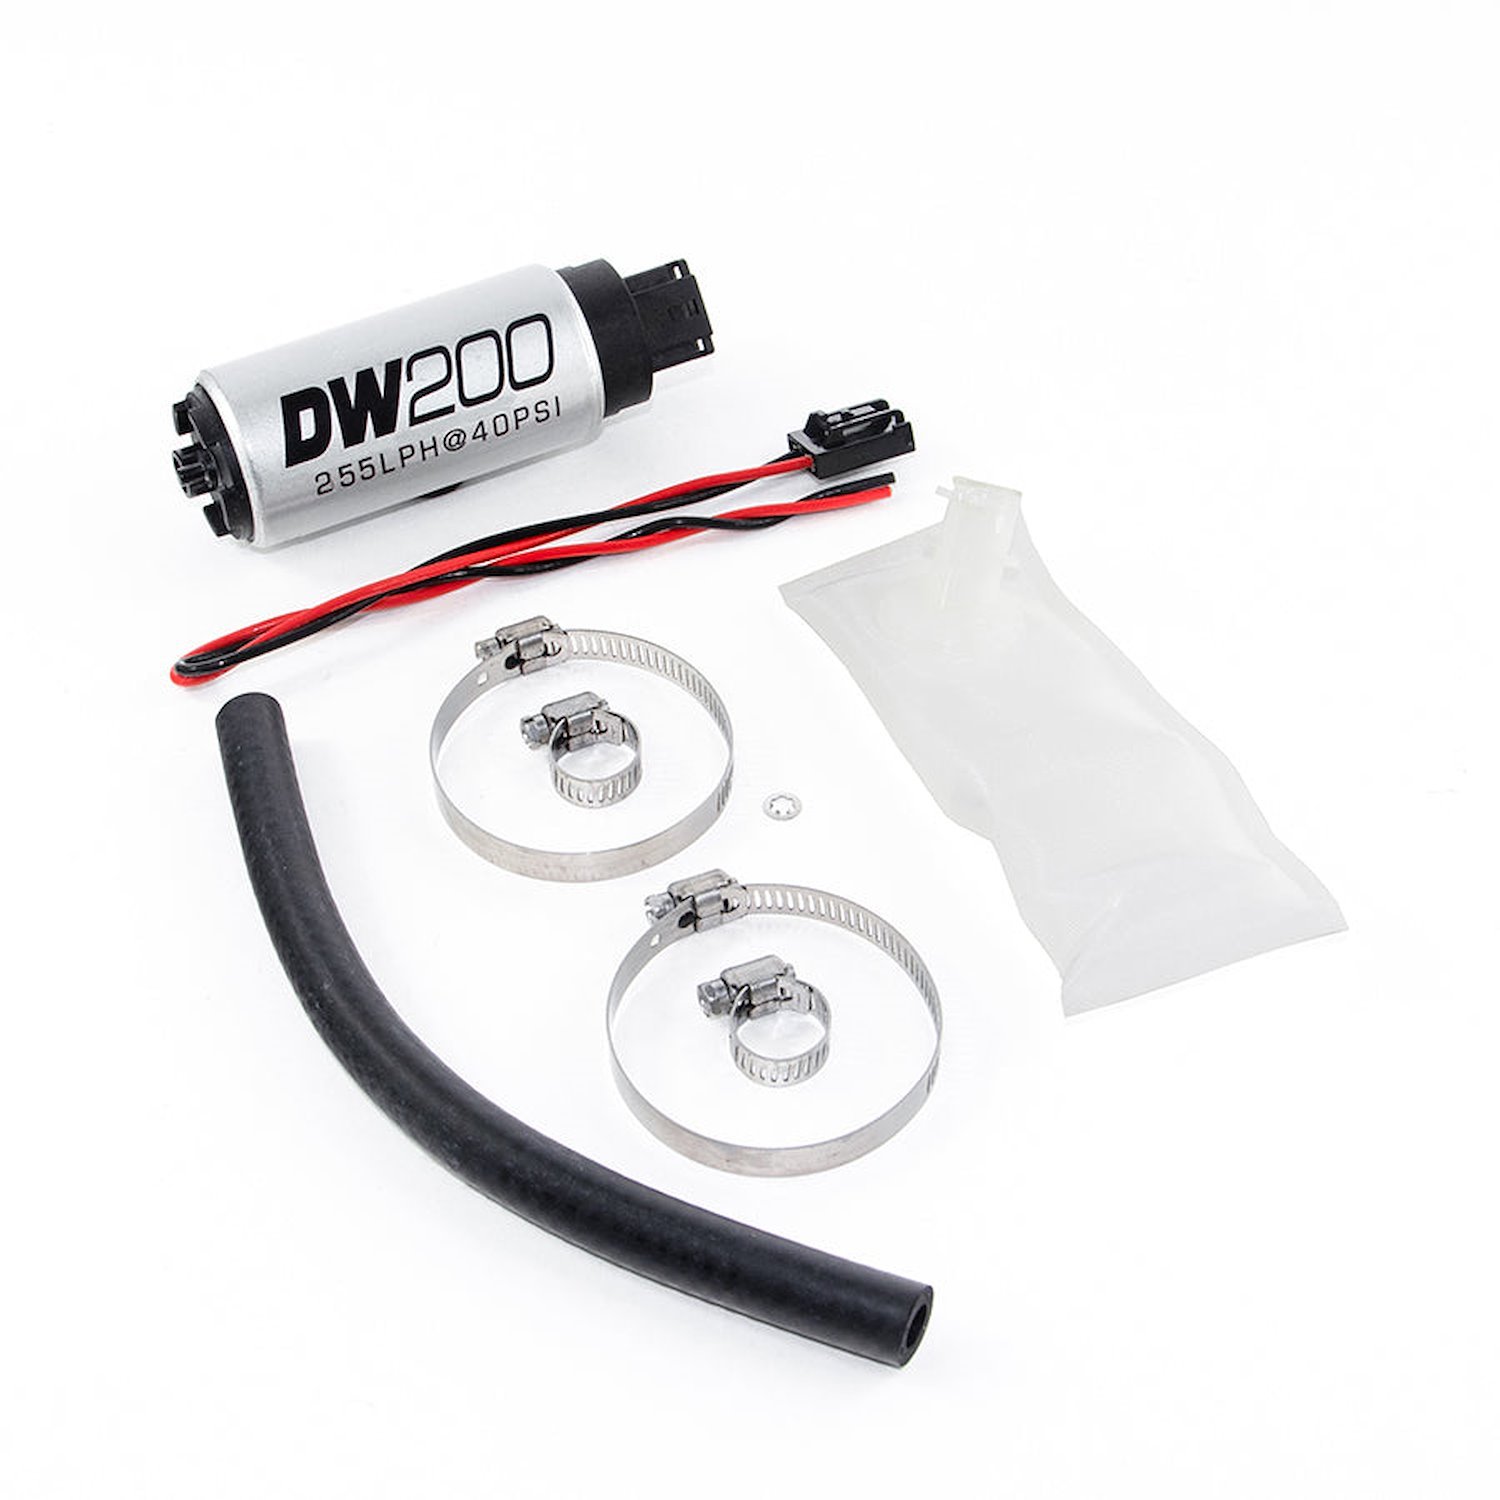 92011023 DW200 Series 255lph In-tank Fuel Pump w/ Install Kit for 89-05 Nissan